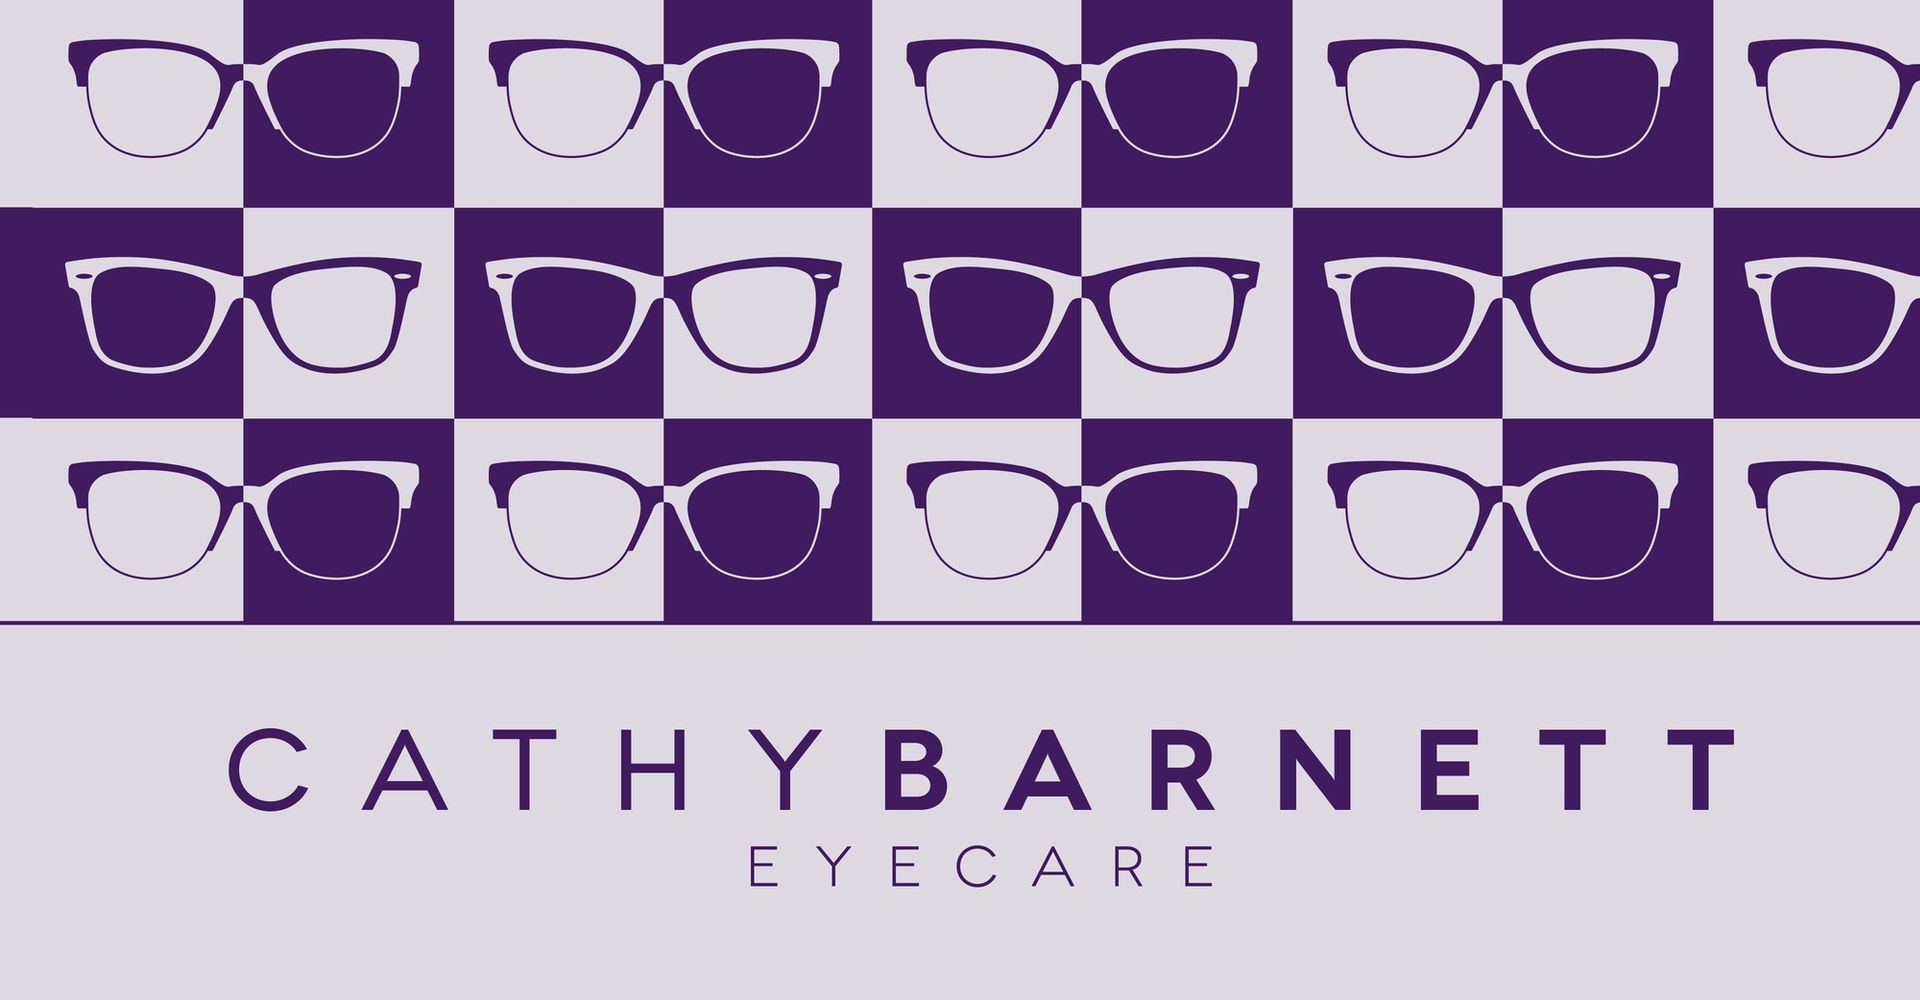 Grid of purple and grey squares with drawing of spectacles covering one of each colour above wording "Cathy Barnett, eyecare".